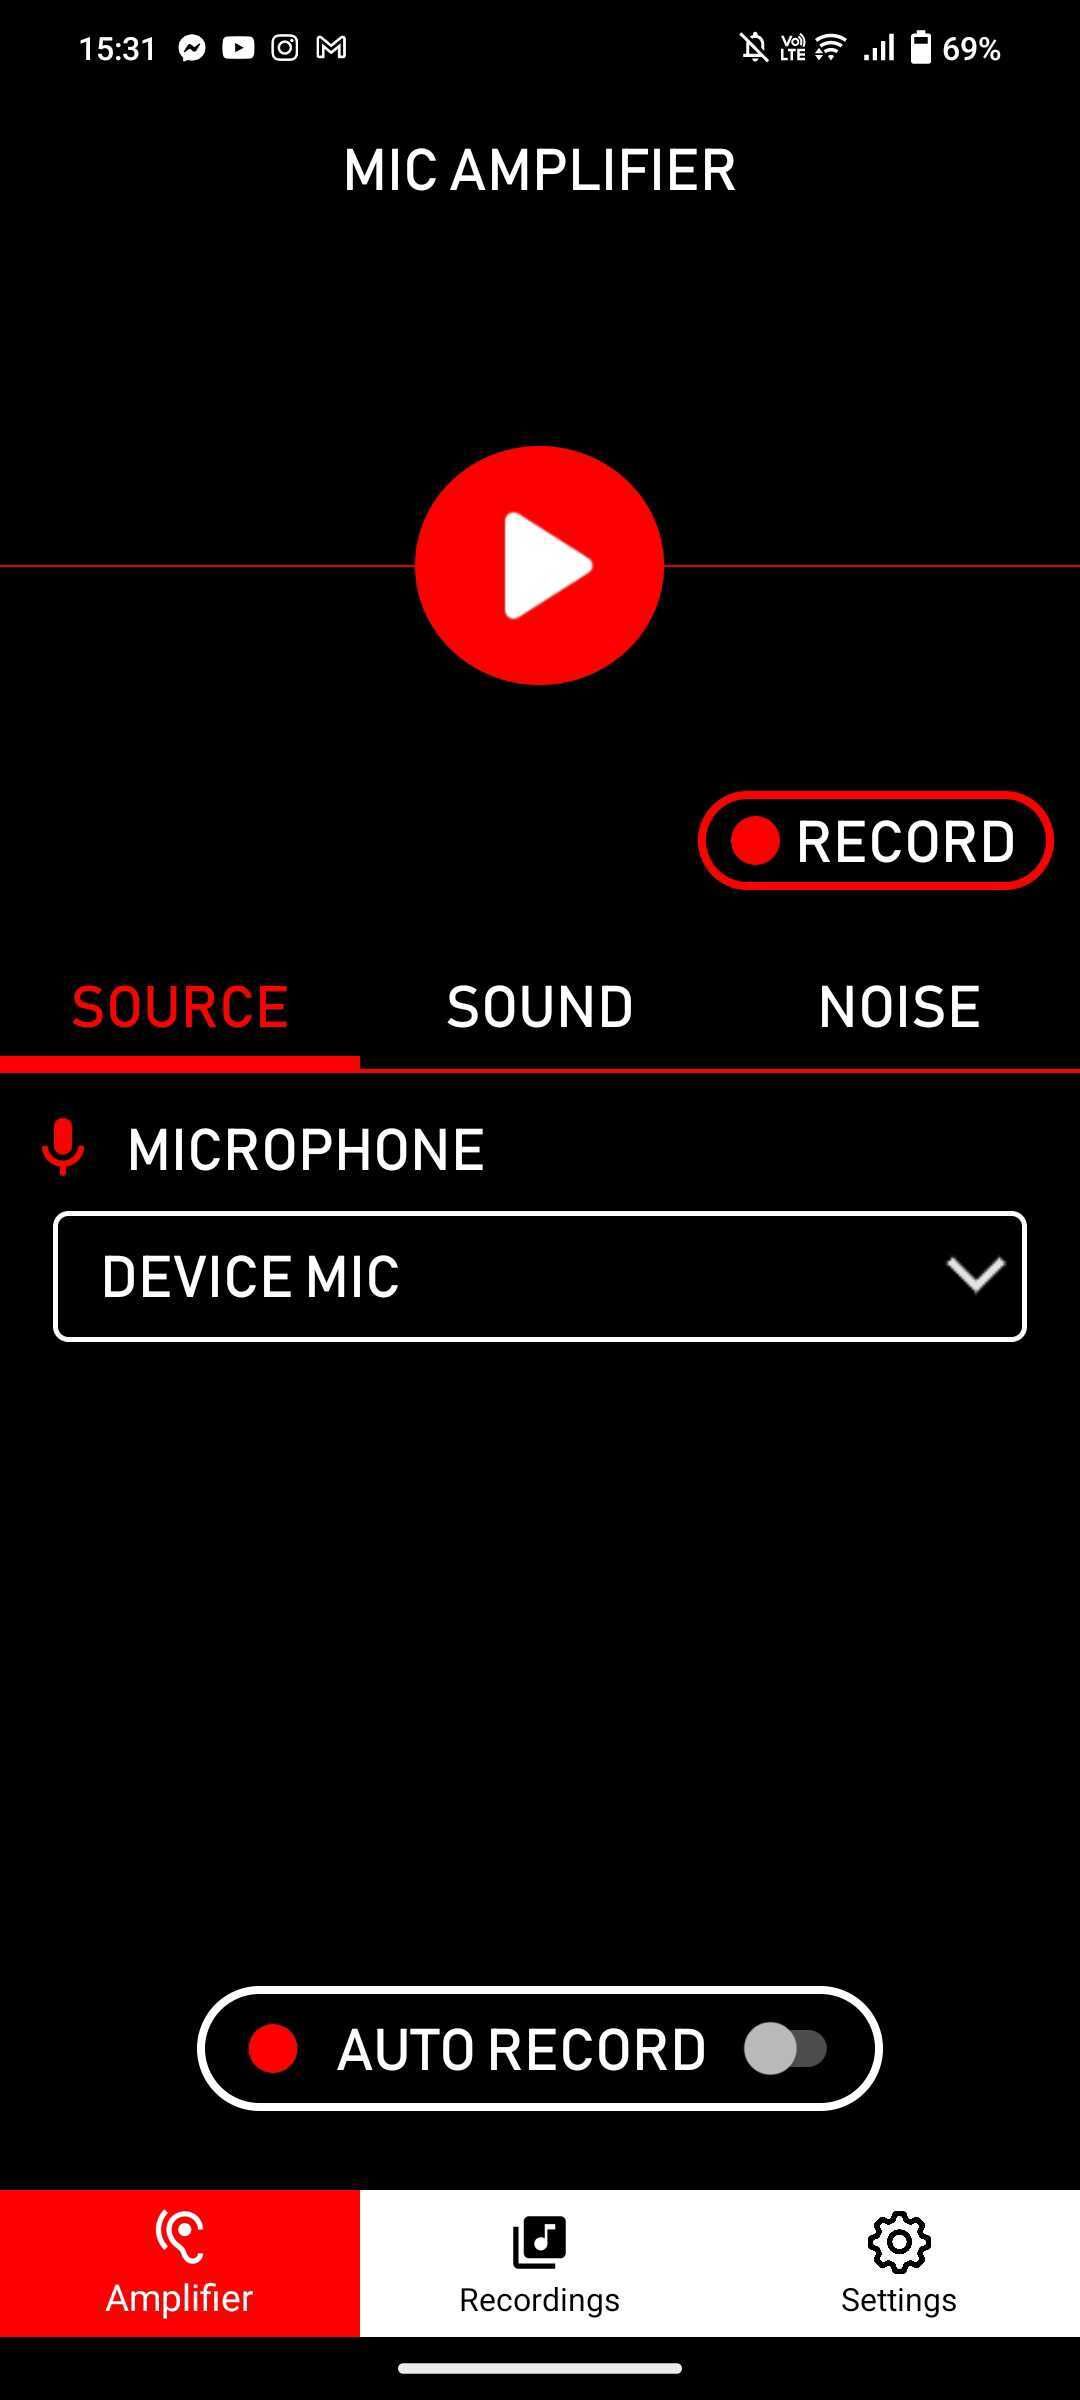 Mic Amplifier on Android source tab